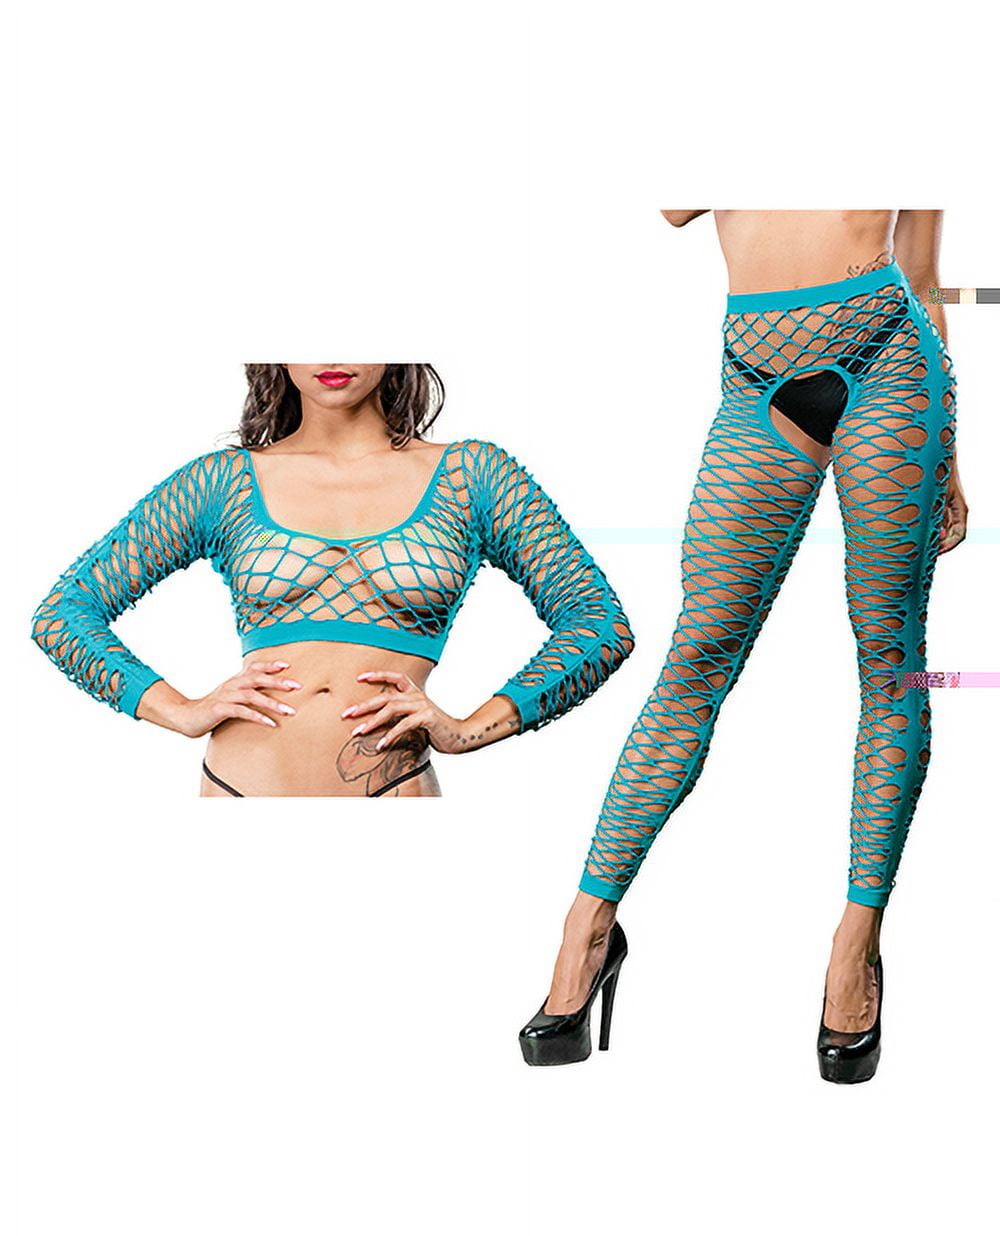 Beverly Hills Naughty Girl Crotchless Front Mesh And Side Design Leggings Turquoise Os 2890